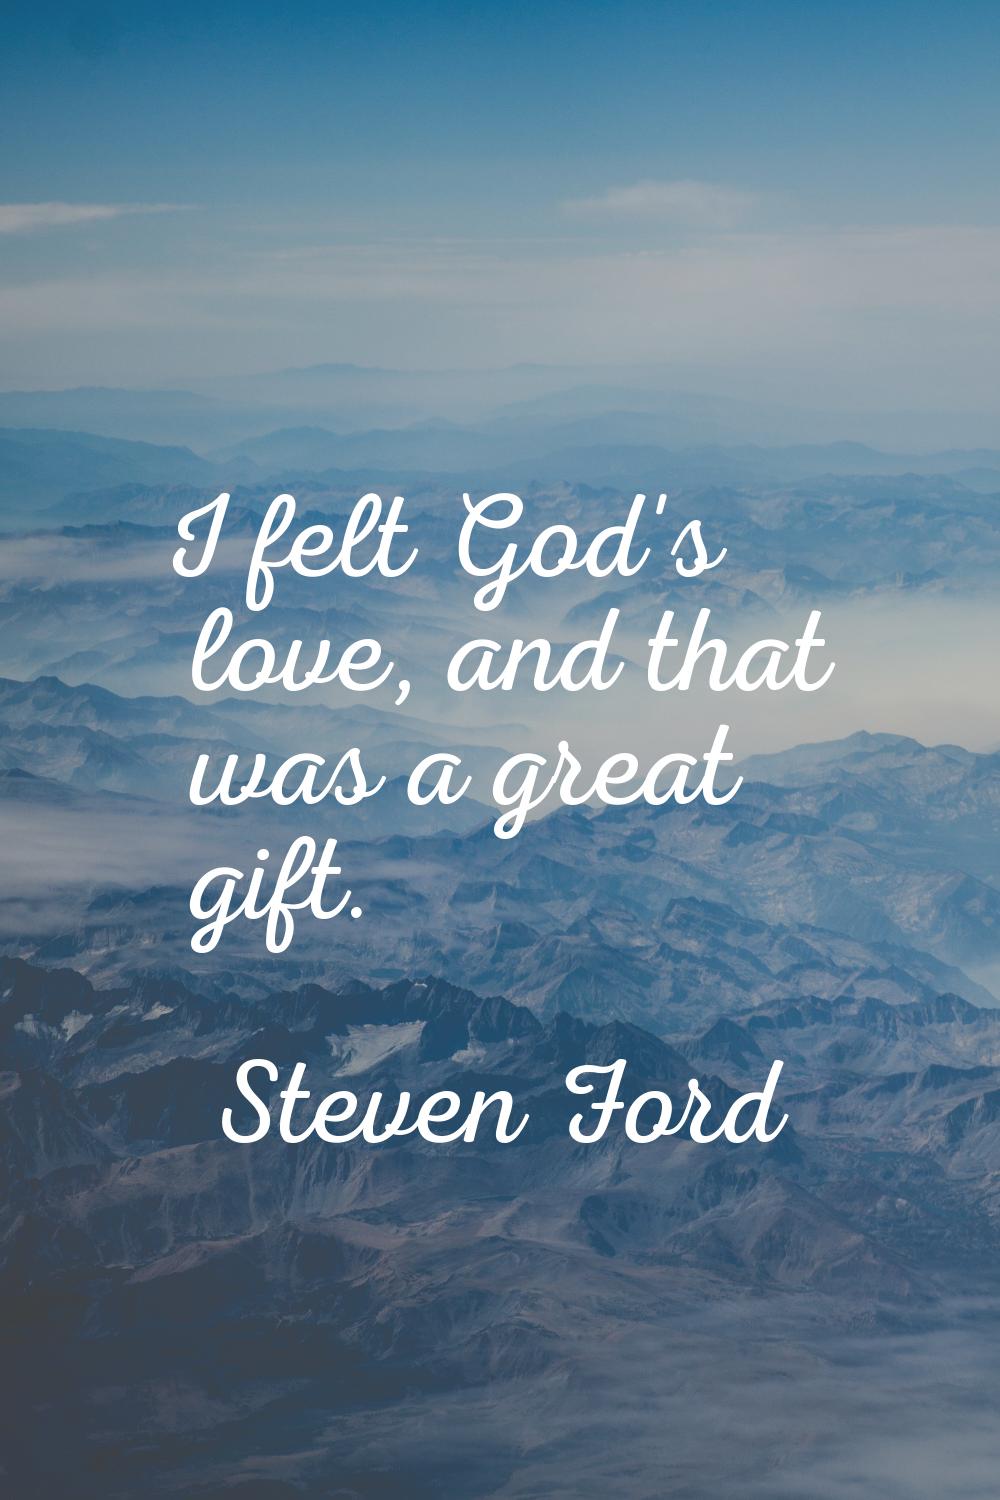 I felt God's love, and that was a great gift.